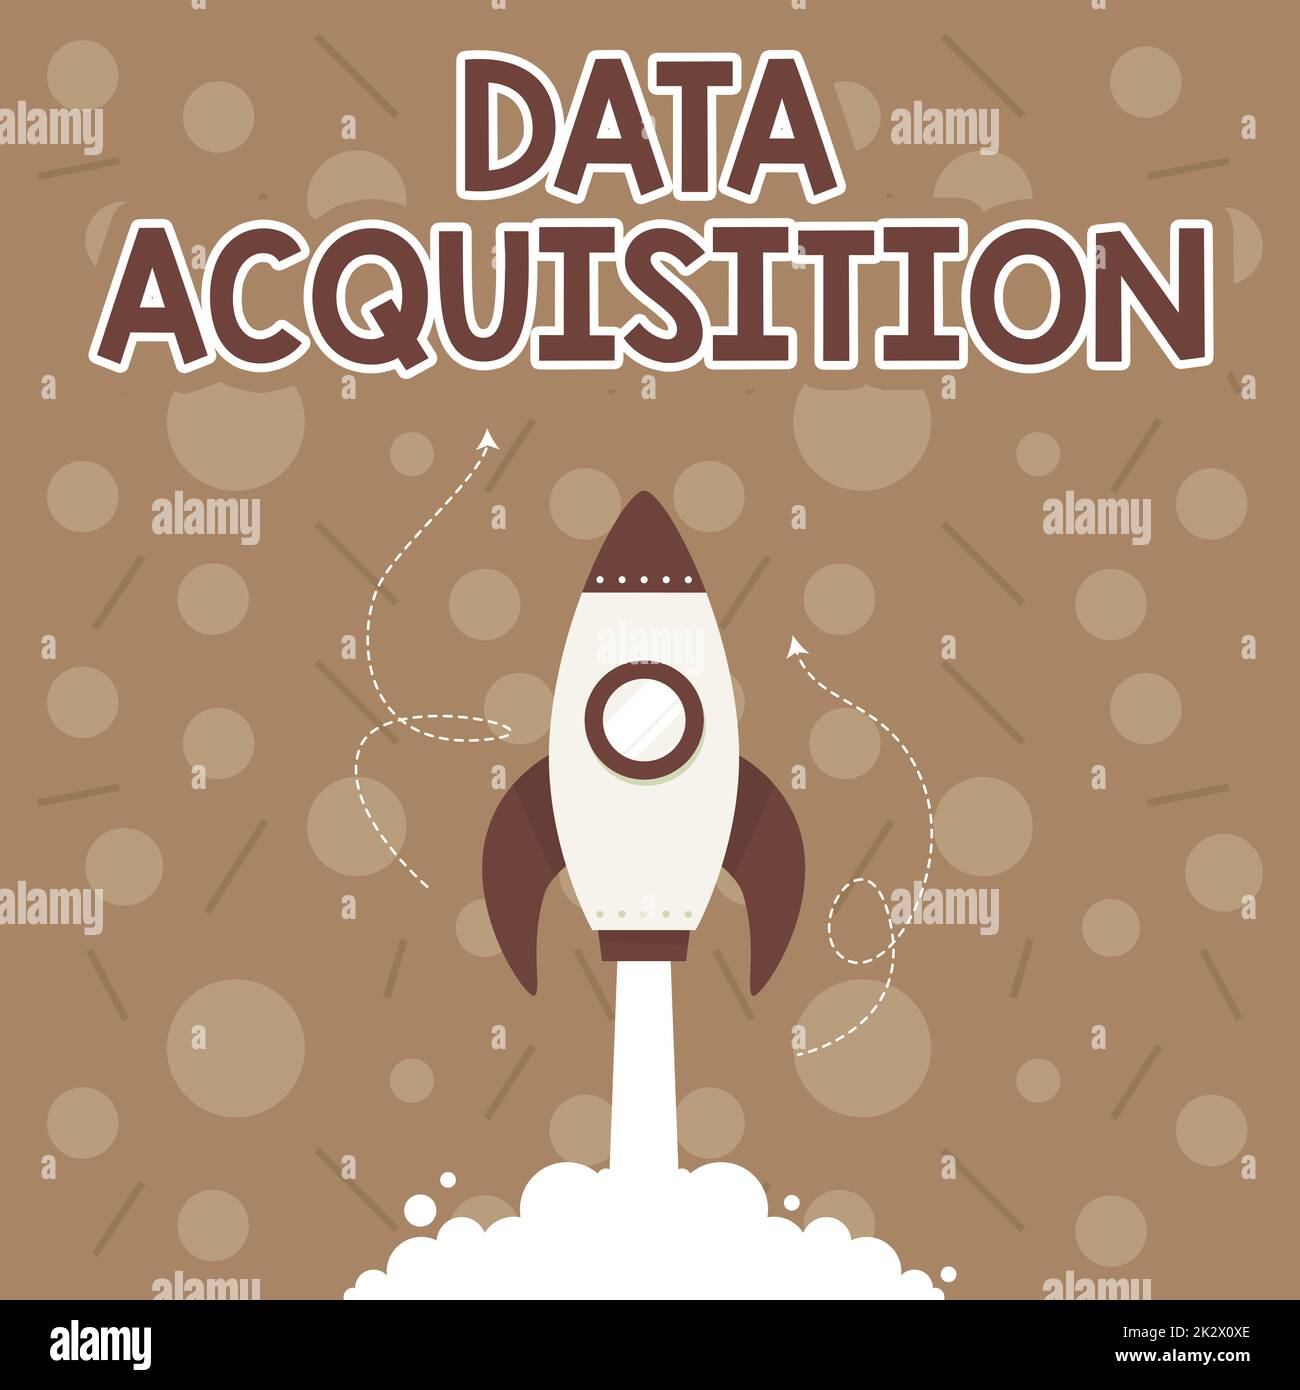 Conceptual display Data Acquisition. Business concept way to obtain statistics that can be maneuvered digitally Illustration Of Rocket Ship Launching Fast Straight Up To The Outer Space. Stock Photo